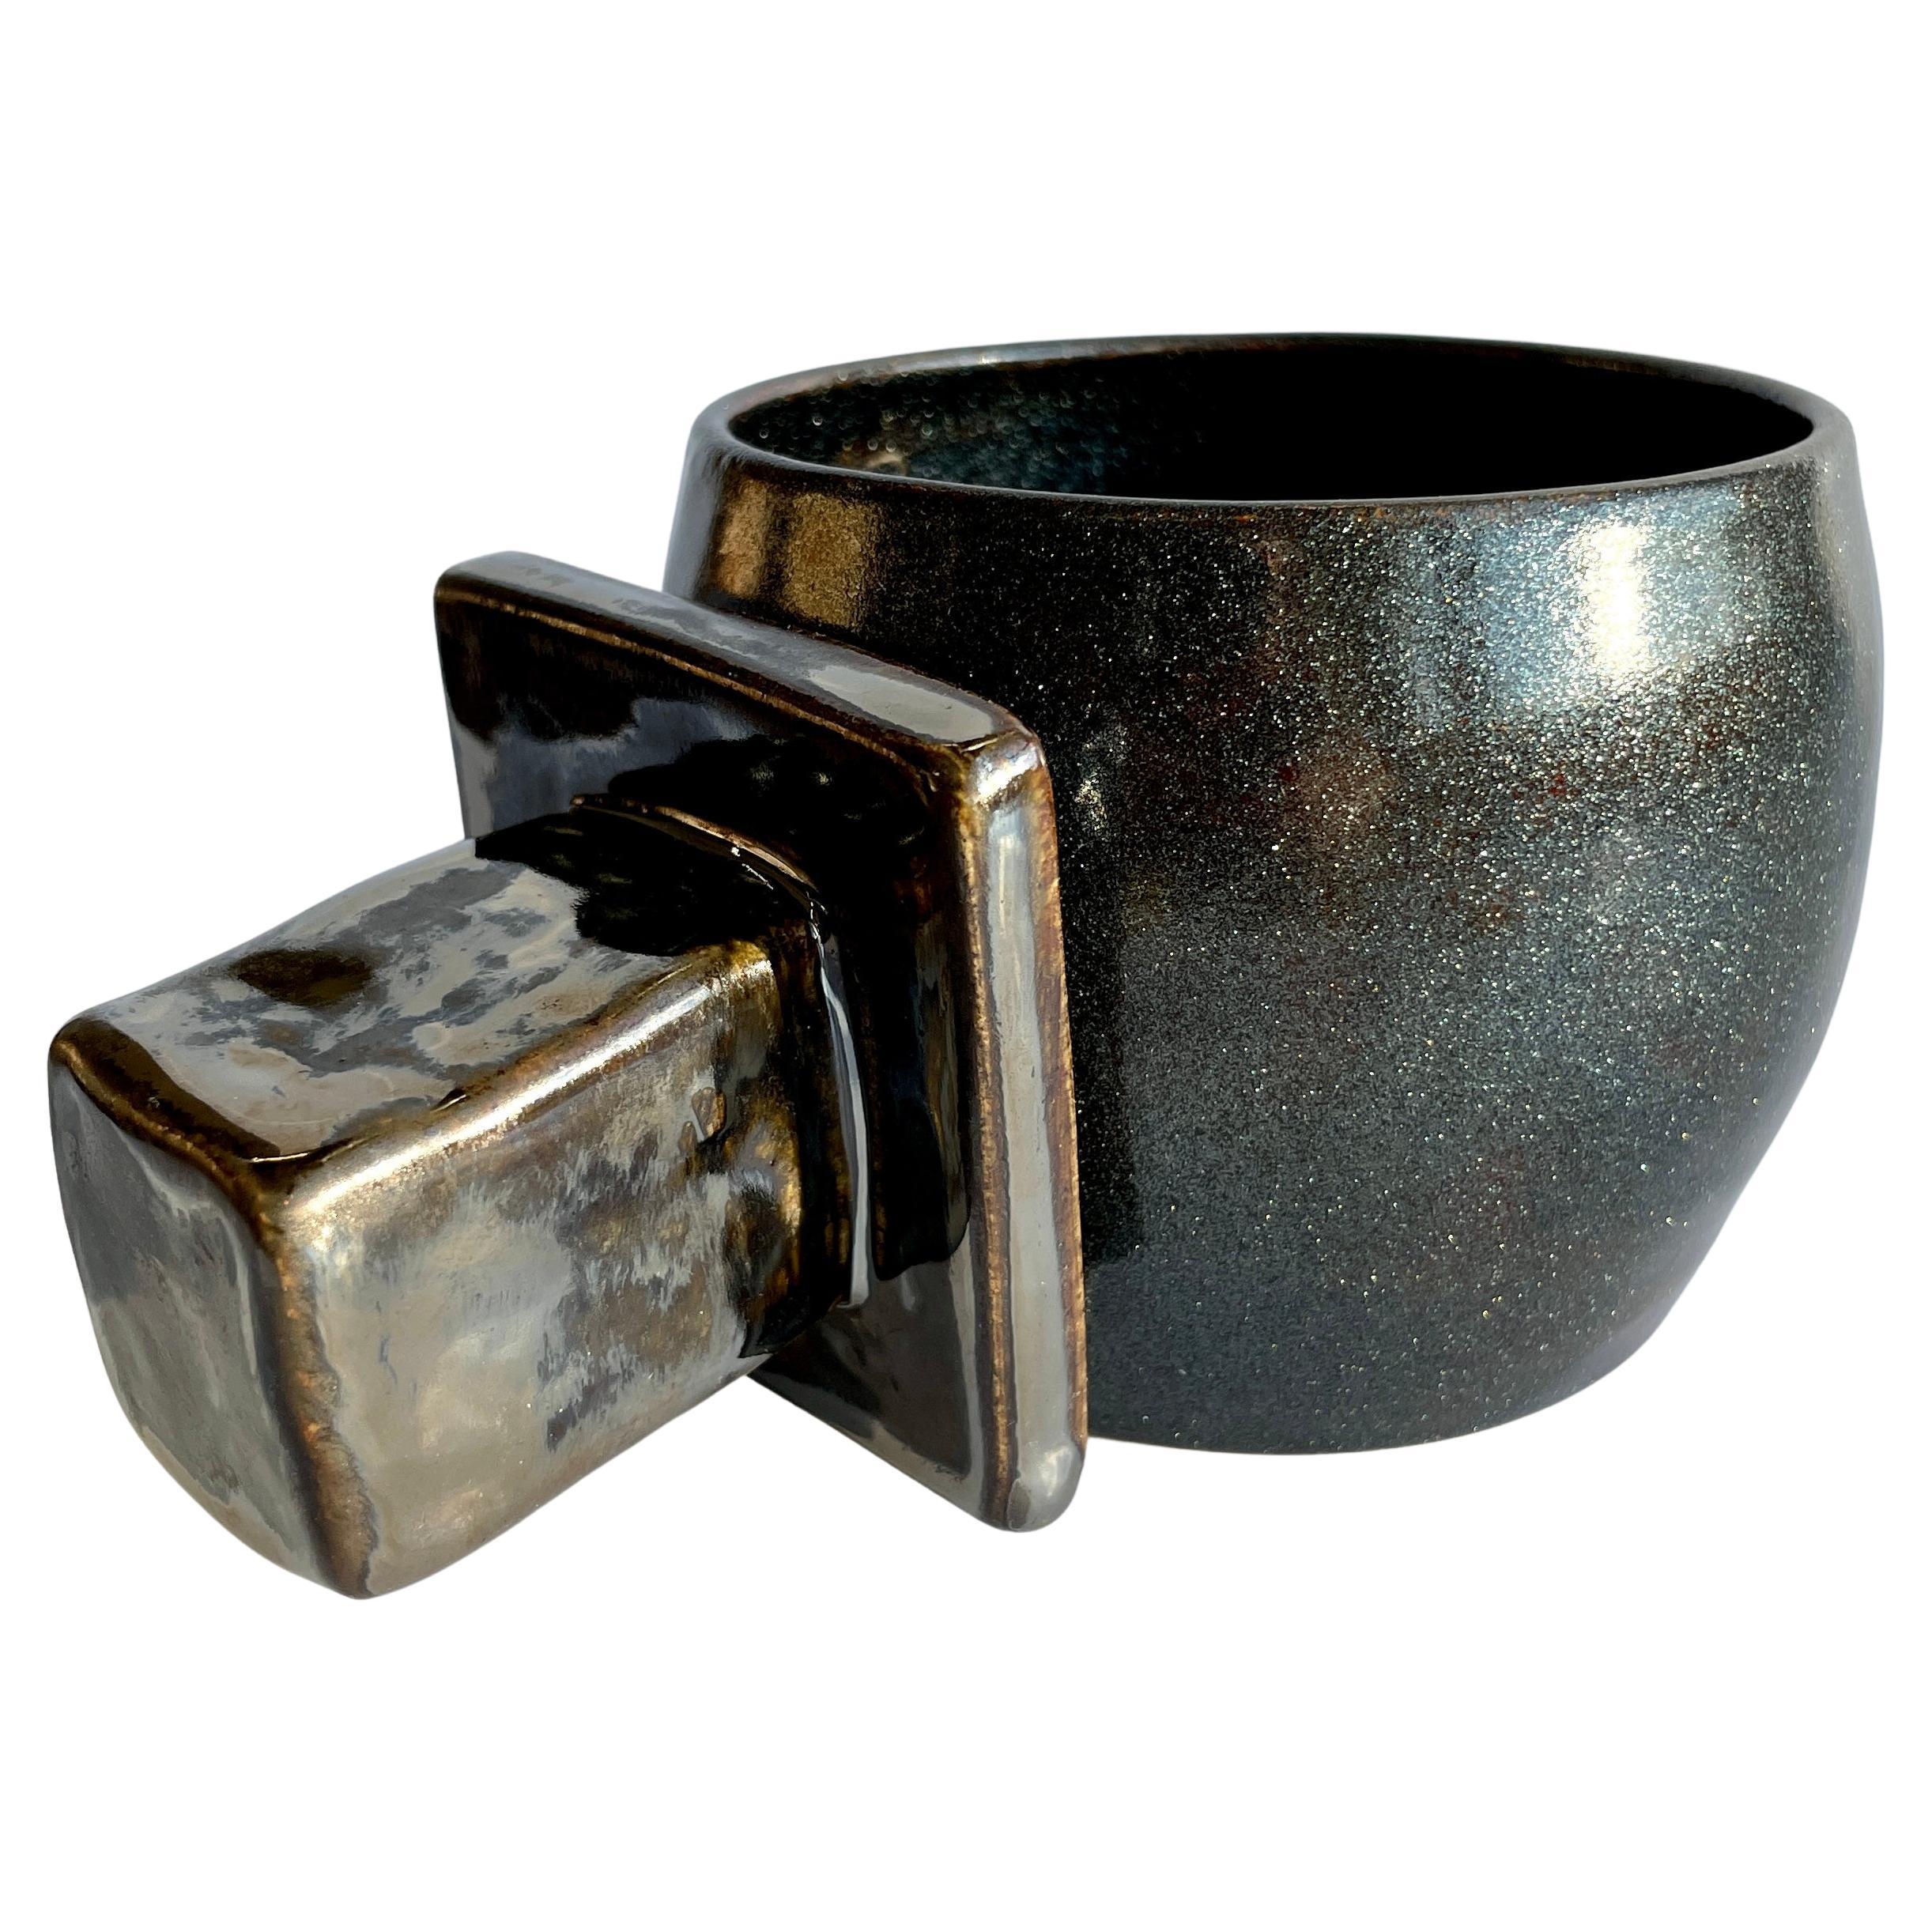 The Square BIB Orbital, shown here in Galaxy and Broken Silver, the food safe vessel for your favorite beverage of choice, entertaining, or as a decorative object or objet d'art. Versatile, sustainable and one of kind, made of recycled stoneware and